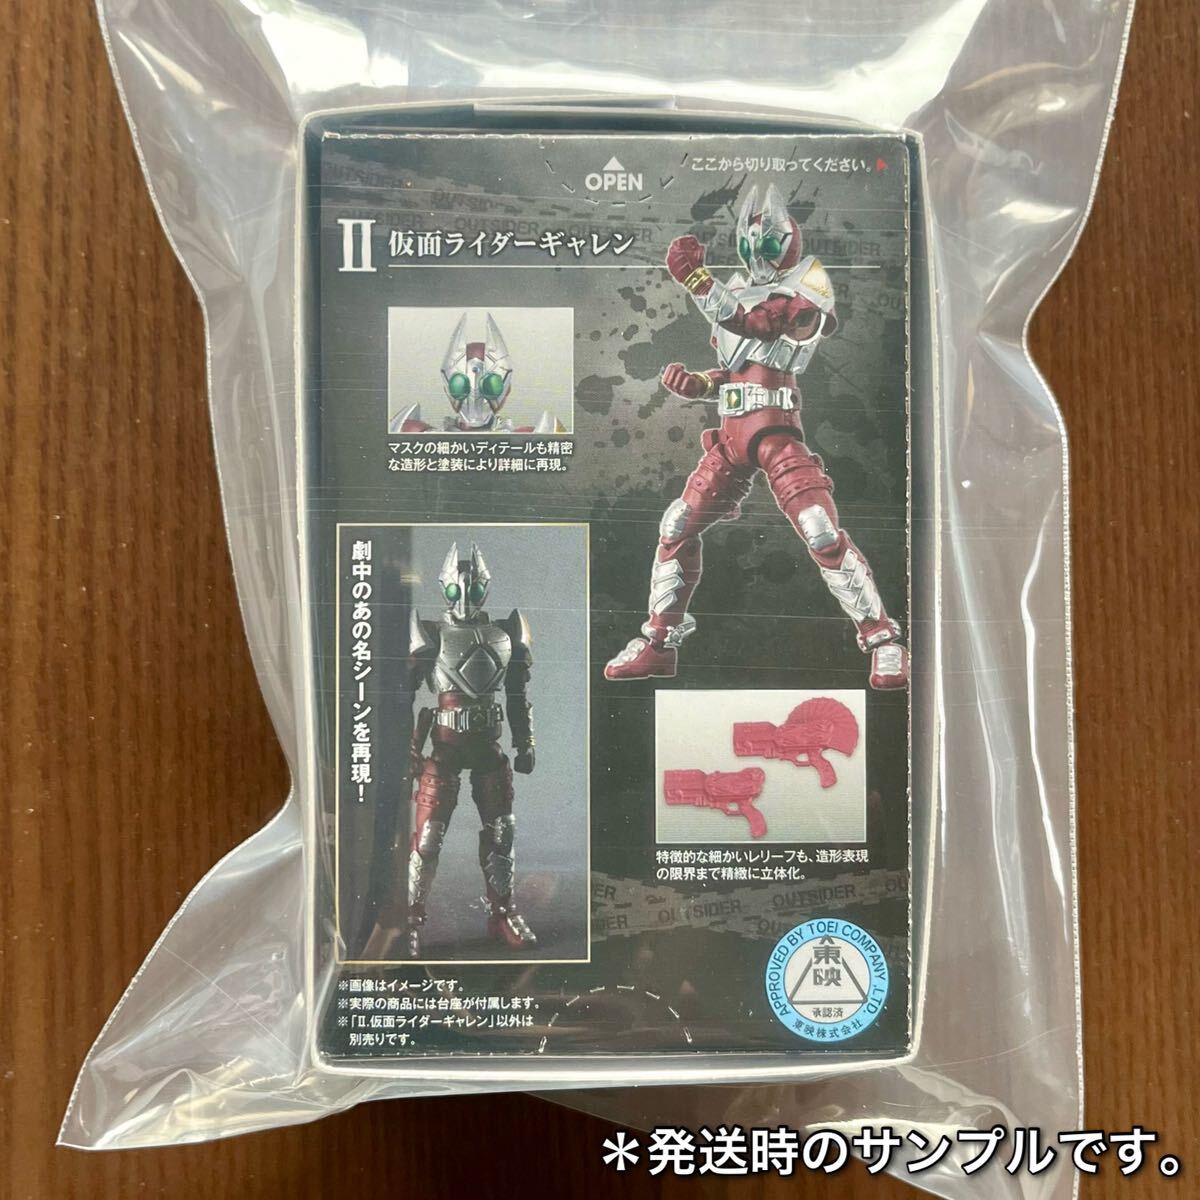  anonymity delivery . moving SHODO-O Kamen Rider 4 Kamen Rider galley n# equipment moving # out rhinoceros da-# Kamen Rider Bray # Kamen Rider ka squirrel #SO-DO